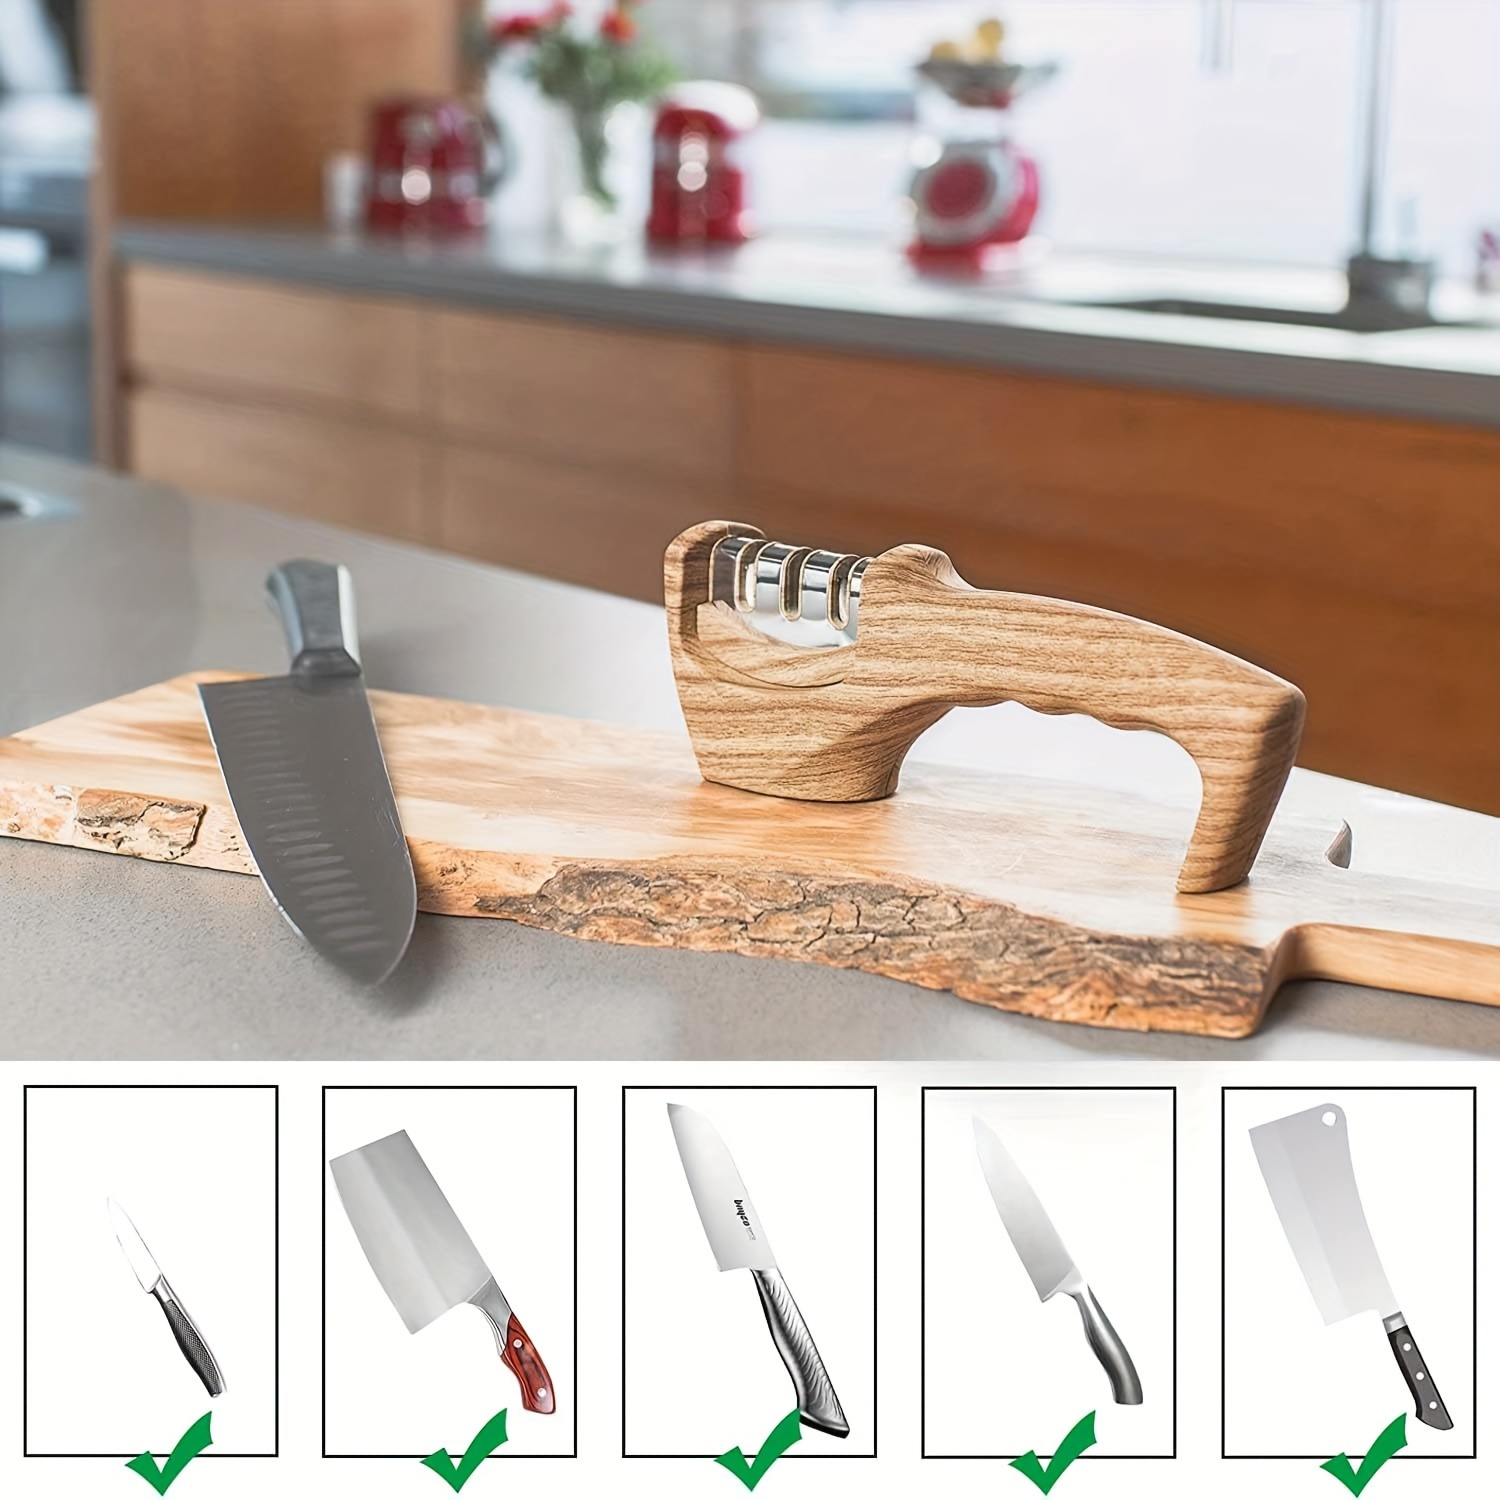 All-in-One Knife Sharpeners for Kitchen Knives, Gardening, & Pocket Knife Sharpening - Knife Sharpener Kit with Mini Blade Sharpener for Knives 